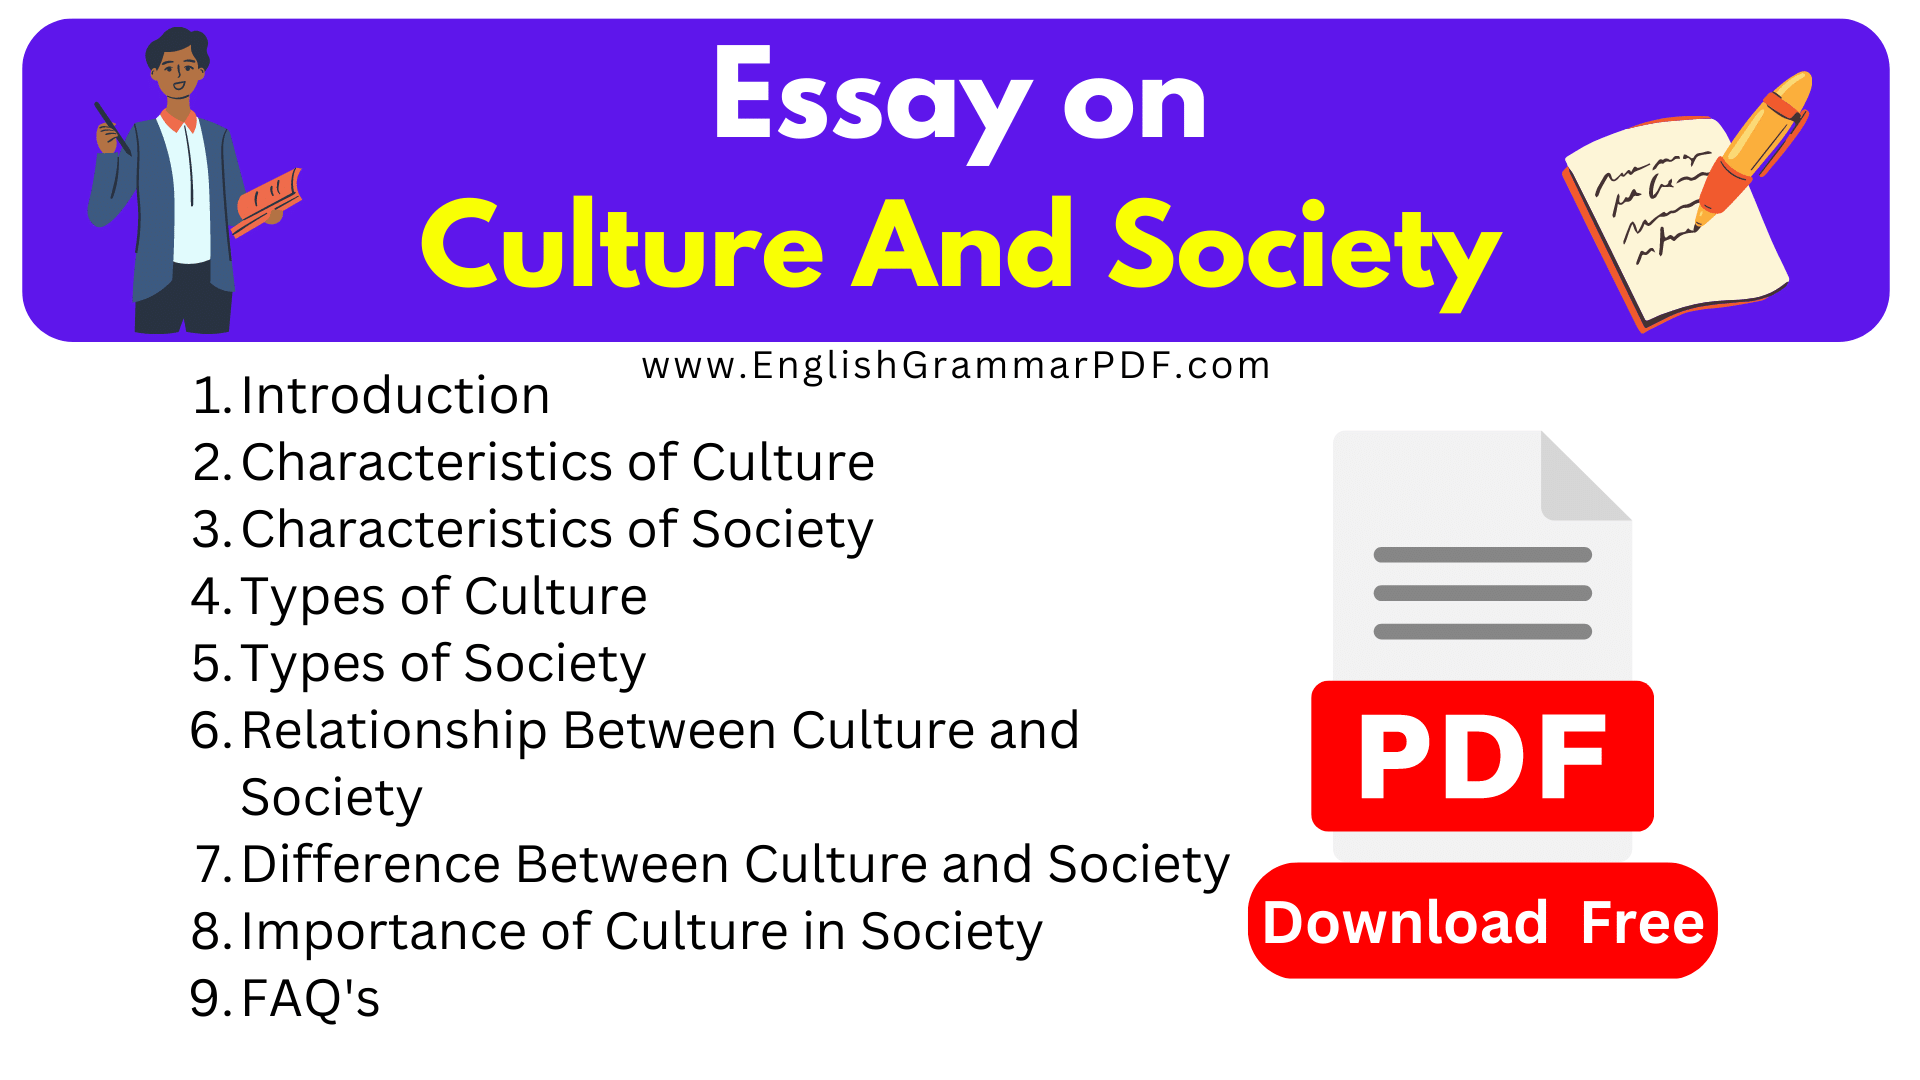 Essay on Culture And Society